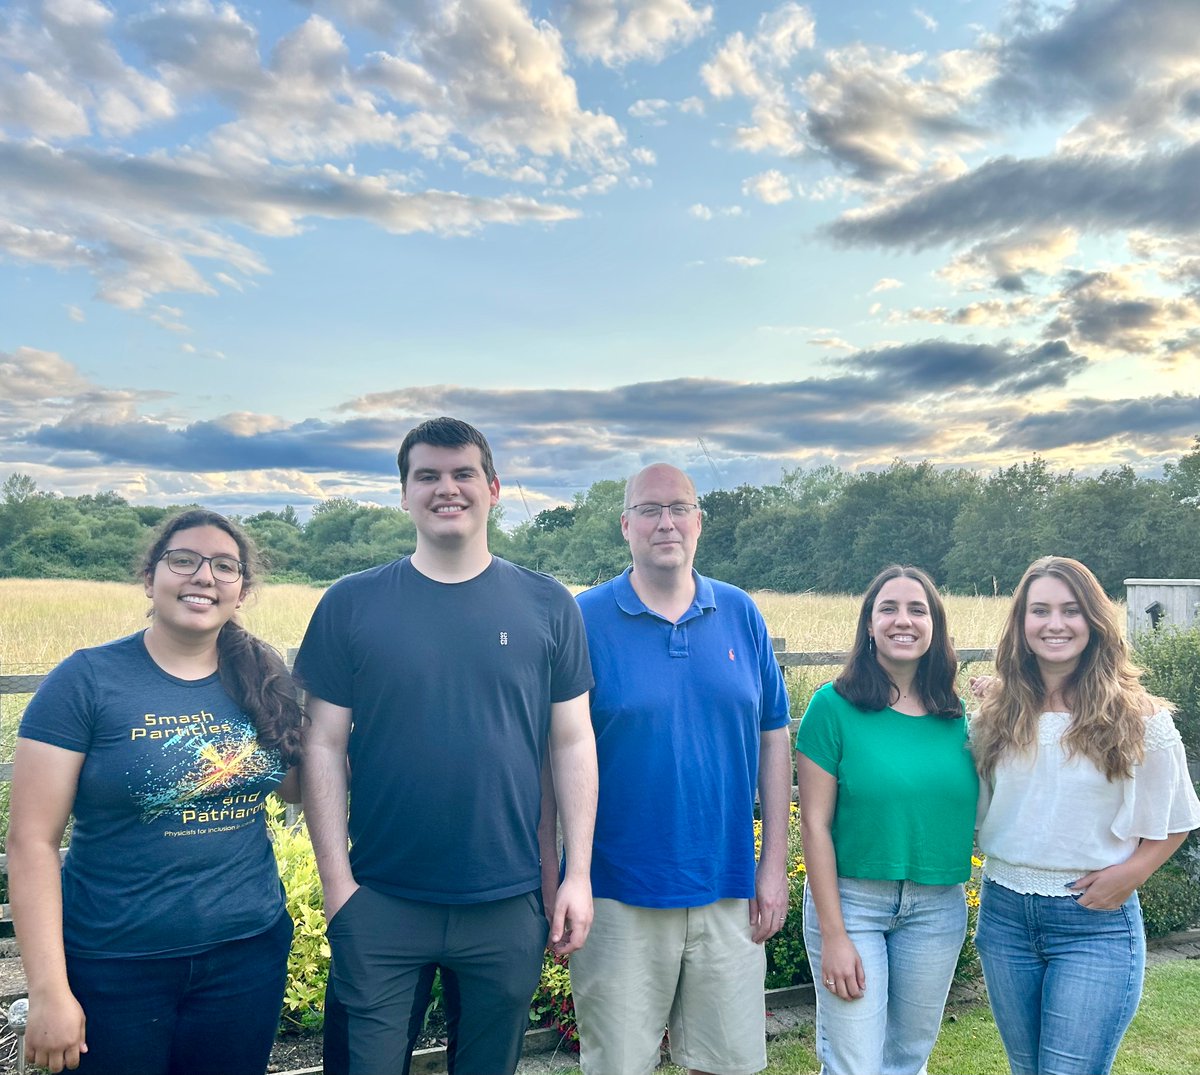 Exciting times! First group bbq (and picture) at our new home @OxfordChemistry. Looking forward to all the exciting chemistry to come from this group of outstanding young chemists!